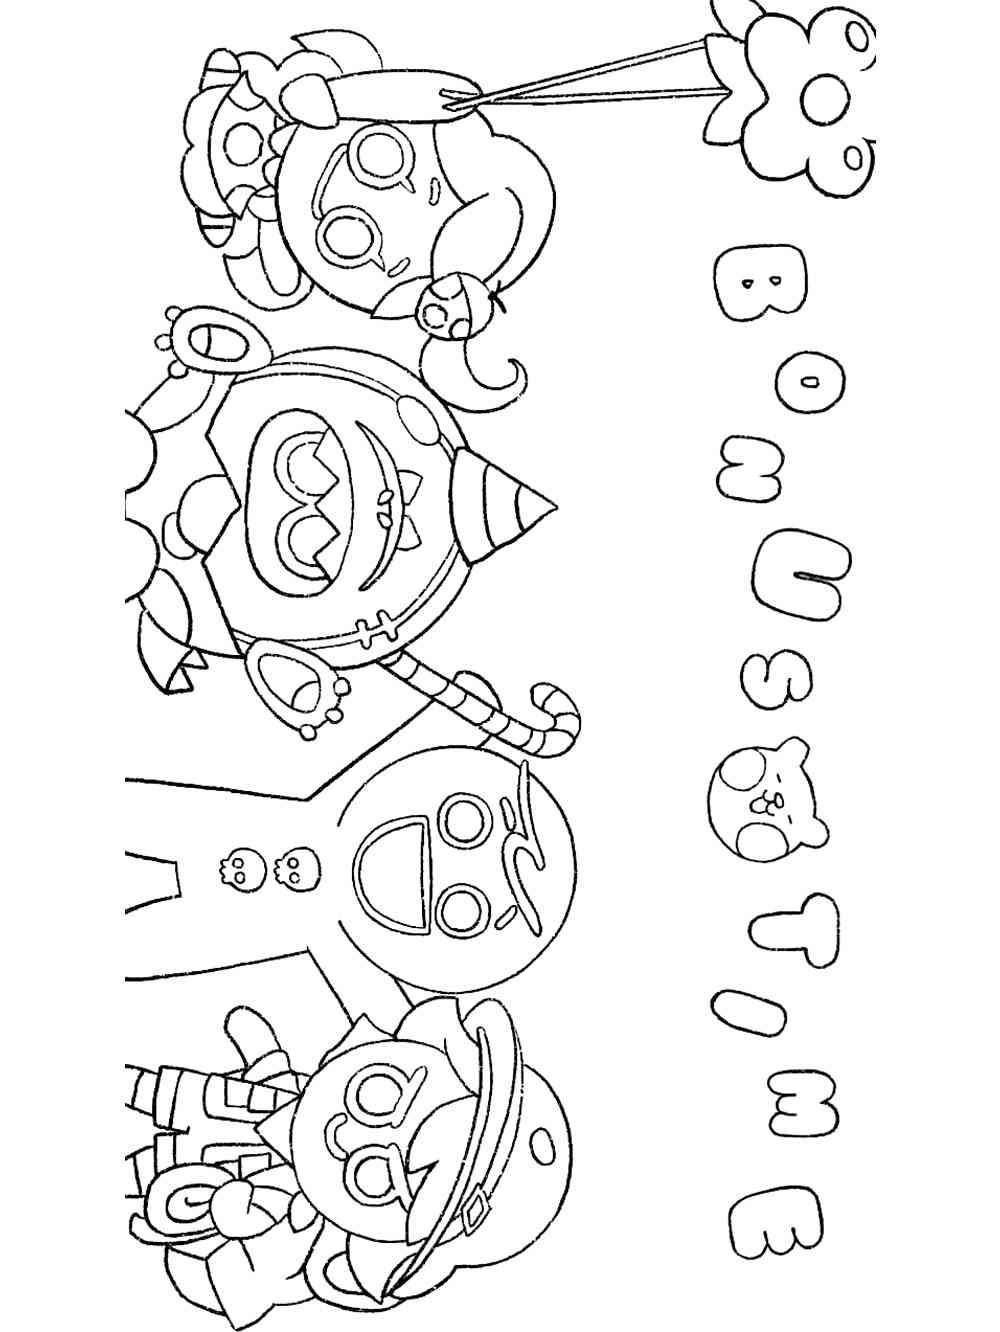 Cookie Run Characters coloring page